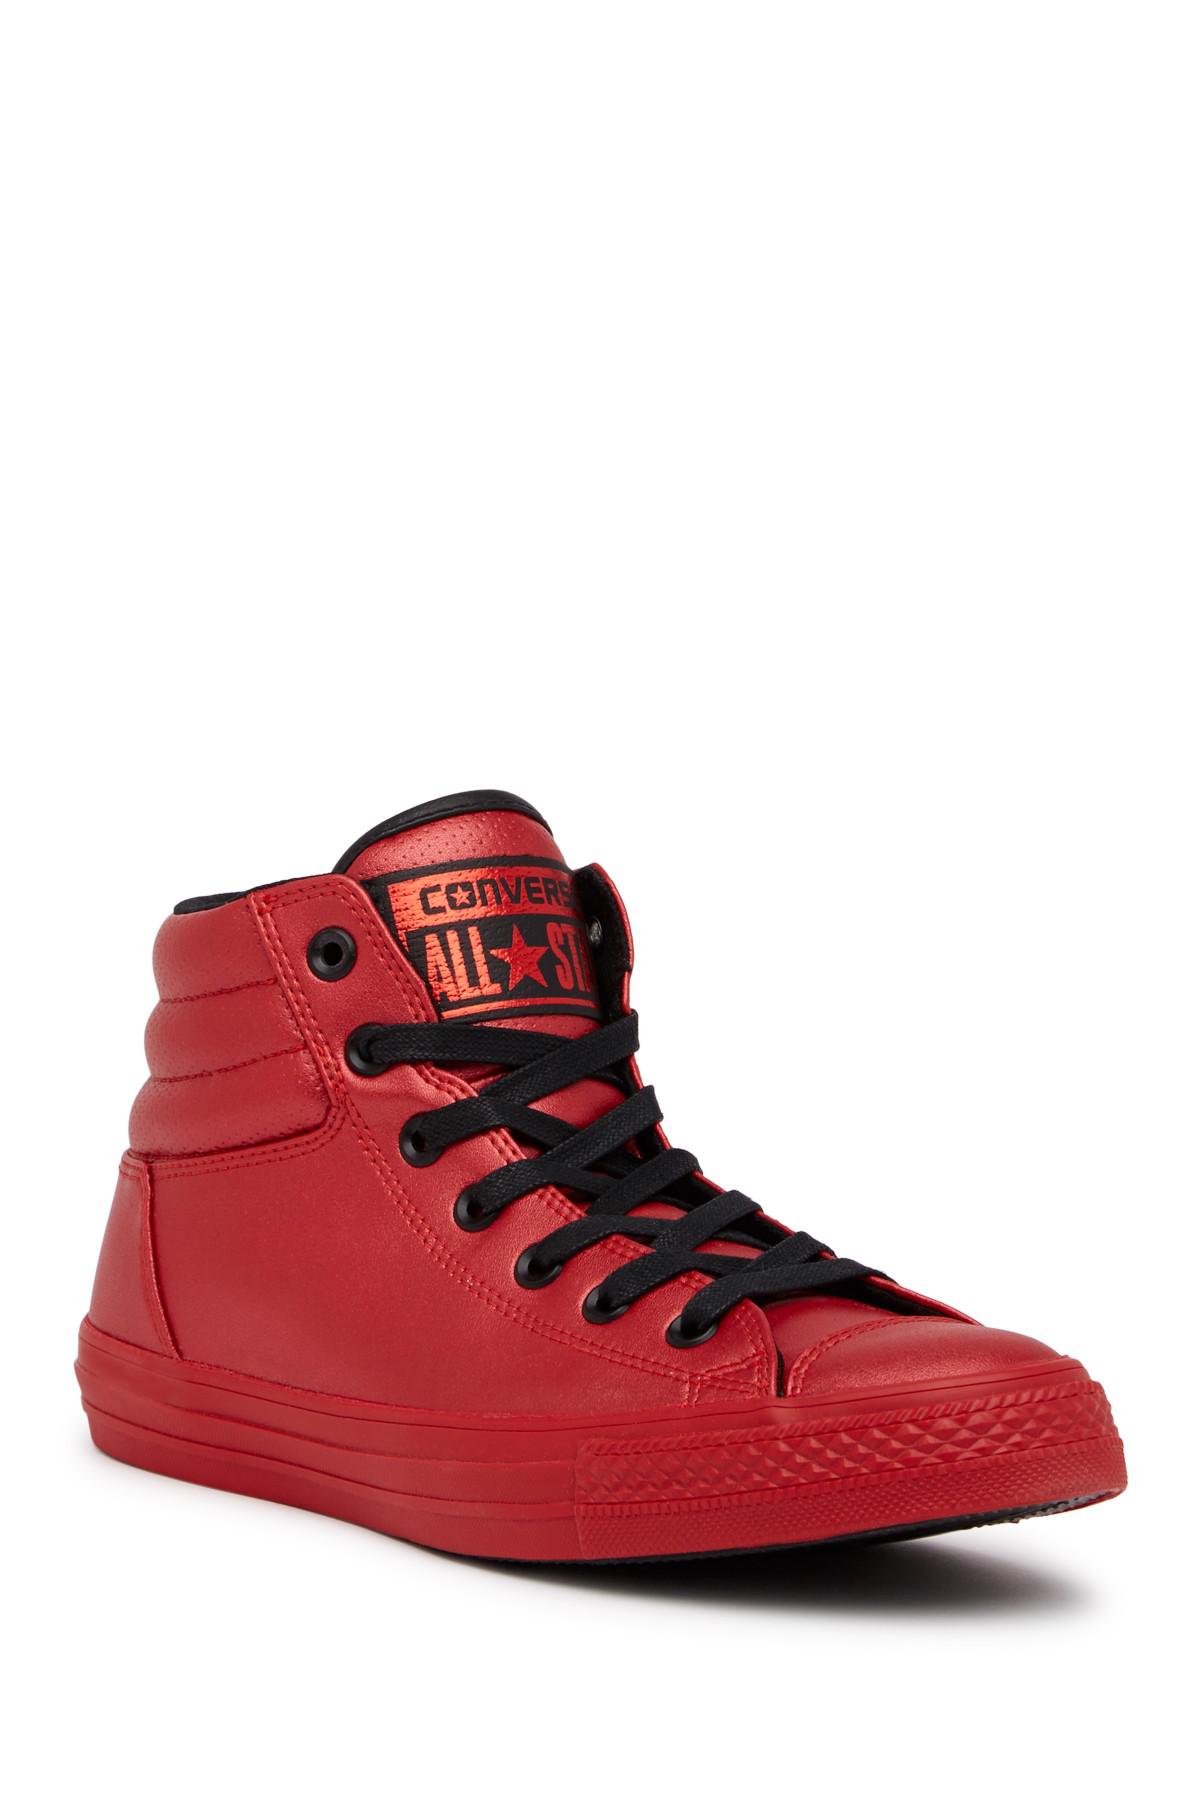 Converse Chuck Taylor All Star Fresh Hi-top Sneaker (men) in Red for ...